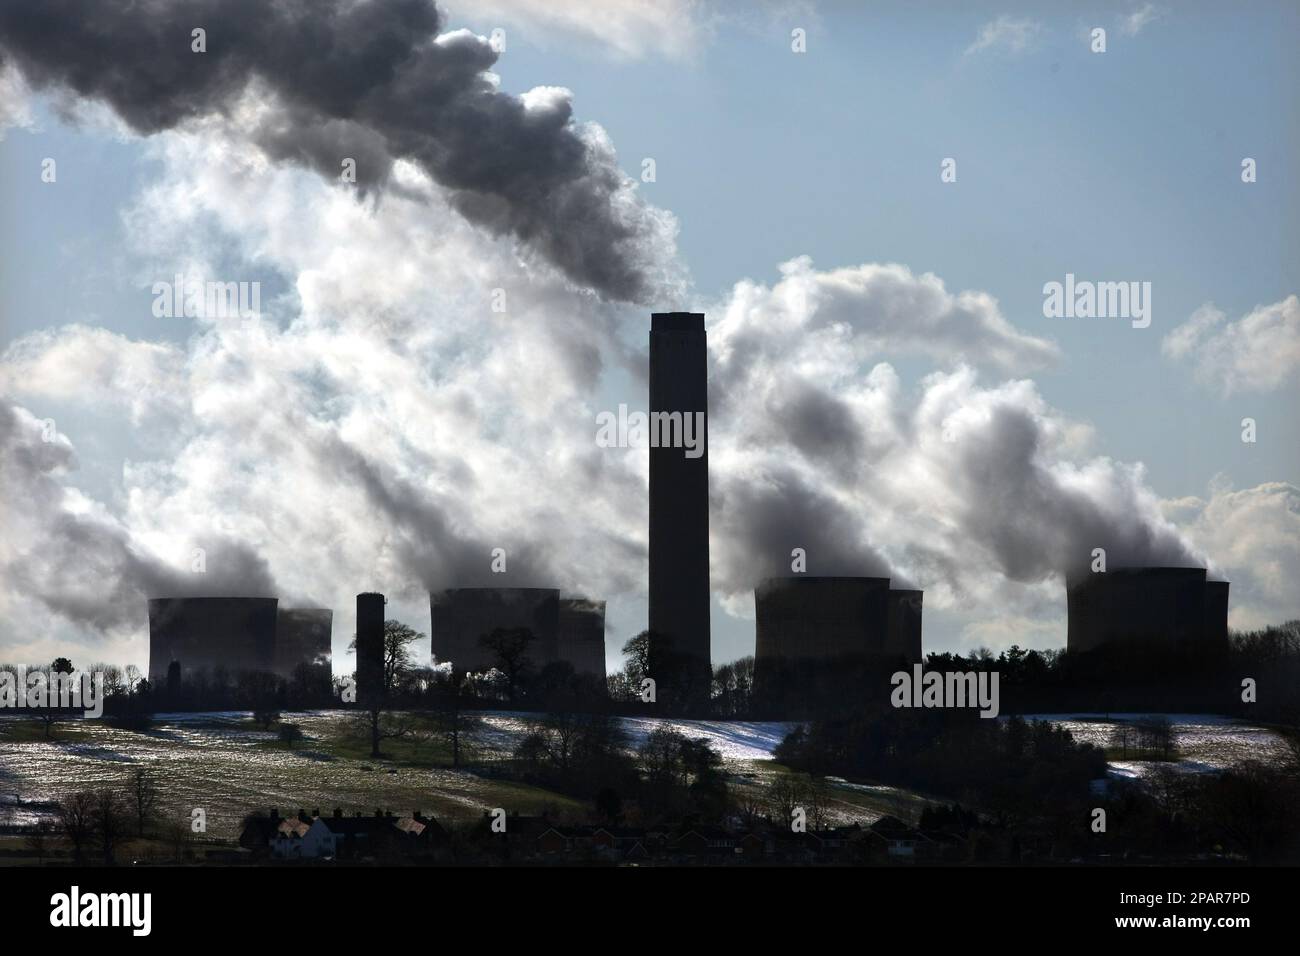 File photo photo dated 10/02/09 of smoke rising out of chimneys at Ratcliffe on Soar power station near Nottingham. Environmental campaigners are calling on the Scottish Government to end support for carbon capture, insisting such projects are a 'dangerous distraction' from the need to move away from fossil fuels. Friends of the Earth Scotland said carbon capture - which seeks to store damaging emissions underground to prevent them being released into the environment - has a history of 'long and inglorious failure' in the UK. Issue date: Sunday March 12, 2023. Stock Photo